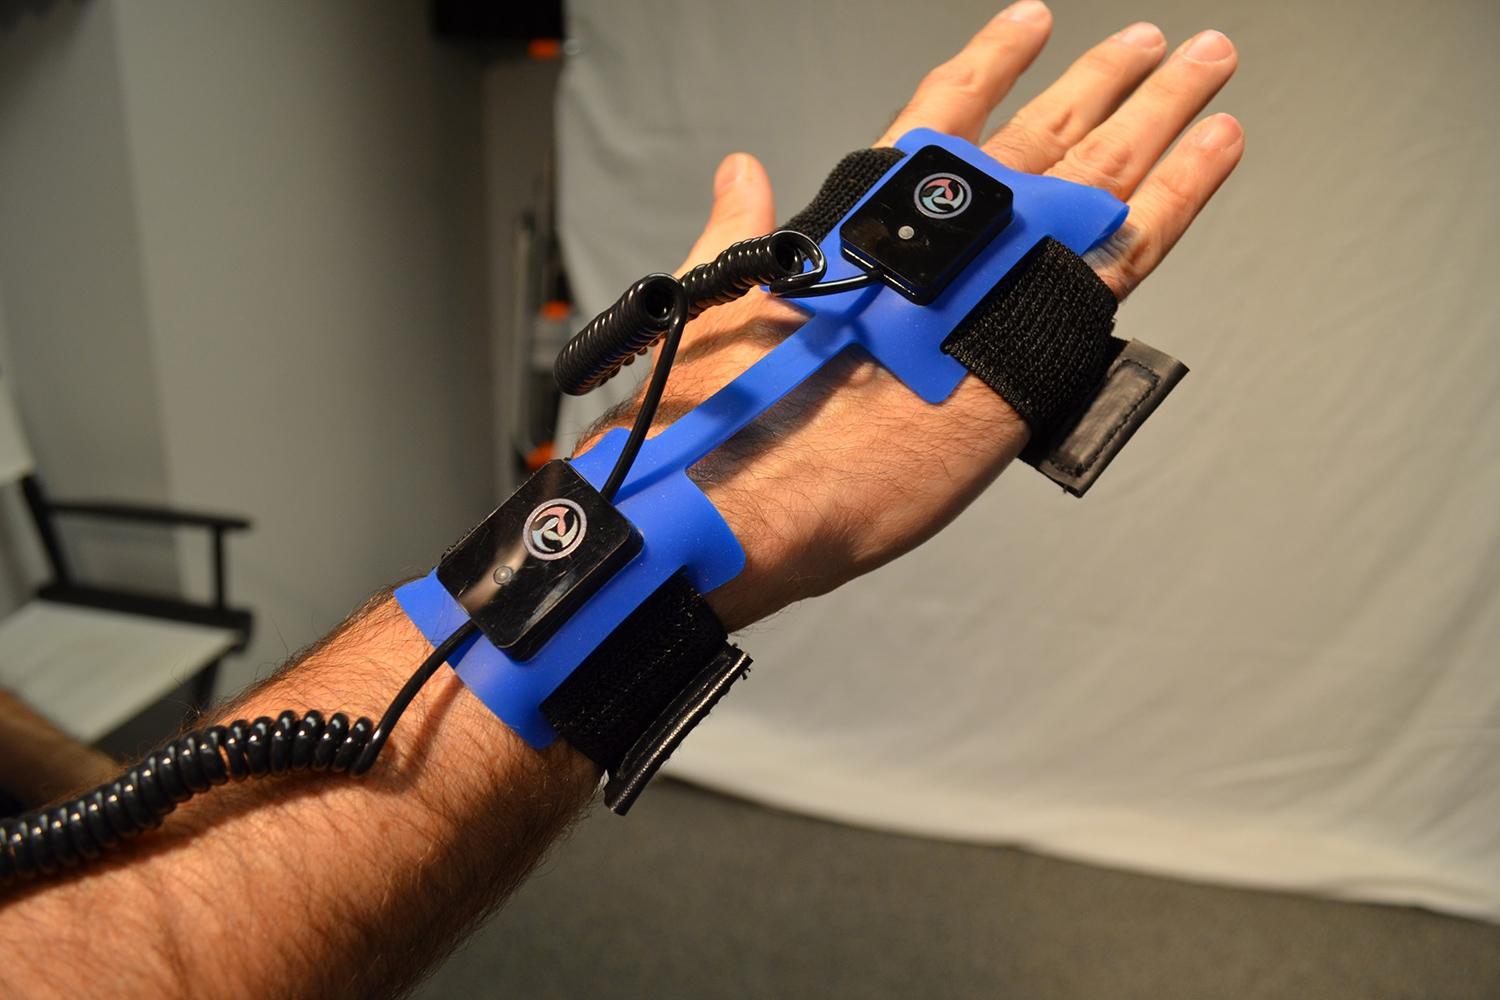 priovr mocap suit turns entire body gaming controller